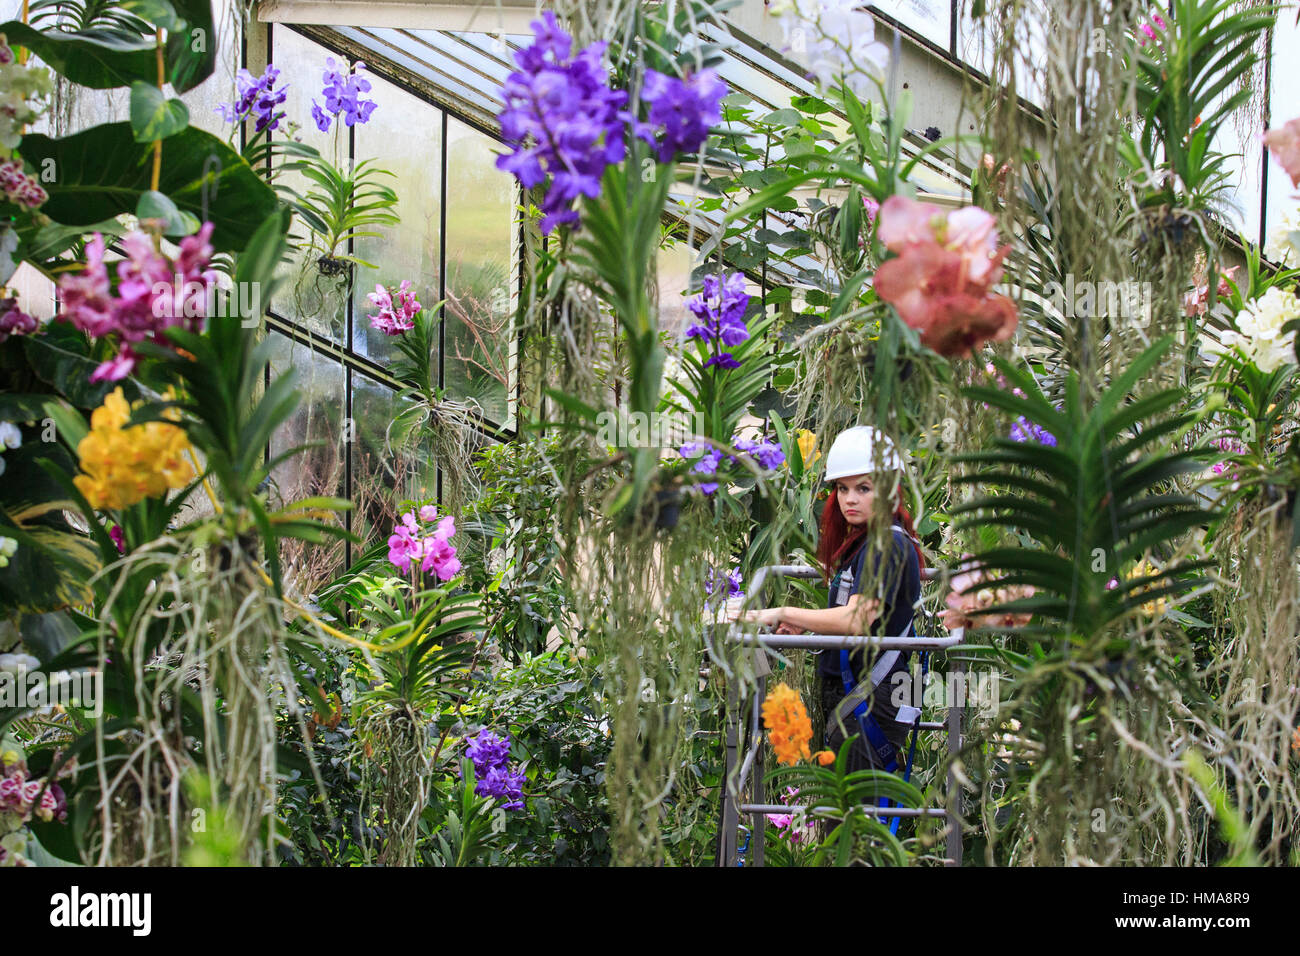 London, UK. 2nd Feb, 2017. Princess of Wales Conservatory Manager and Festival creator Elisa Biondi working with vanda orchids. Press preview of the Kew Gardens 2017 Orchids Festival which opens to the public on Saturday, 4 February in the Princess of Wales Conservatory. The 22nd annual Kew Orchid Festival is a colourful celebration of India's vibrant plants and culture. It took Kew staff and volunteers 1,600 hours to create. 3,600 orchids are on display until 5 March 2017. Credit: Vibrant Pictures/Alamy Live News Stock Photo